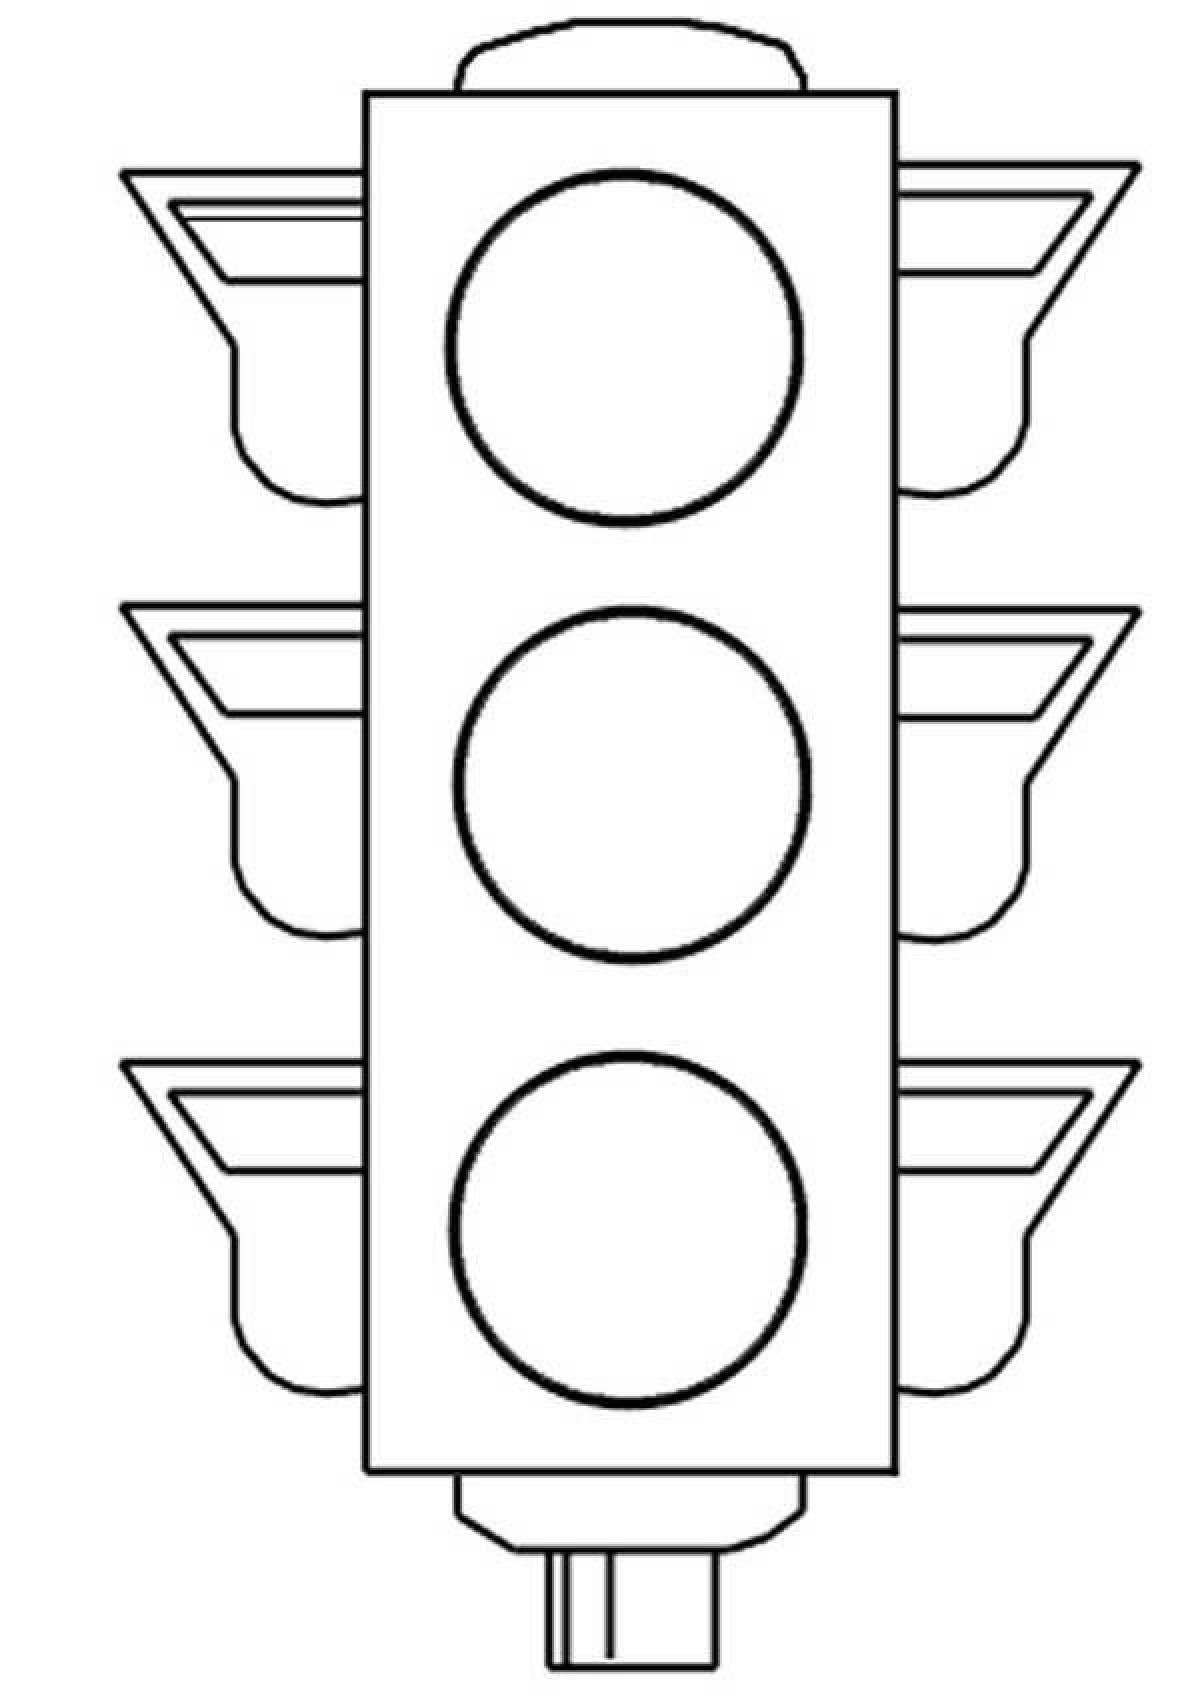 Bright traffic light coloring page for 6-7 year olds